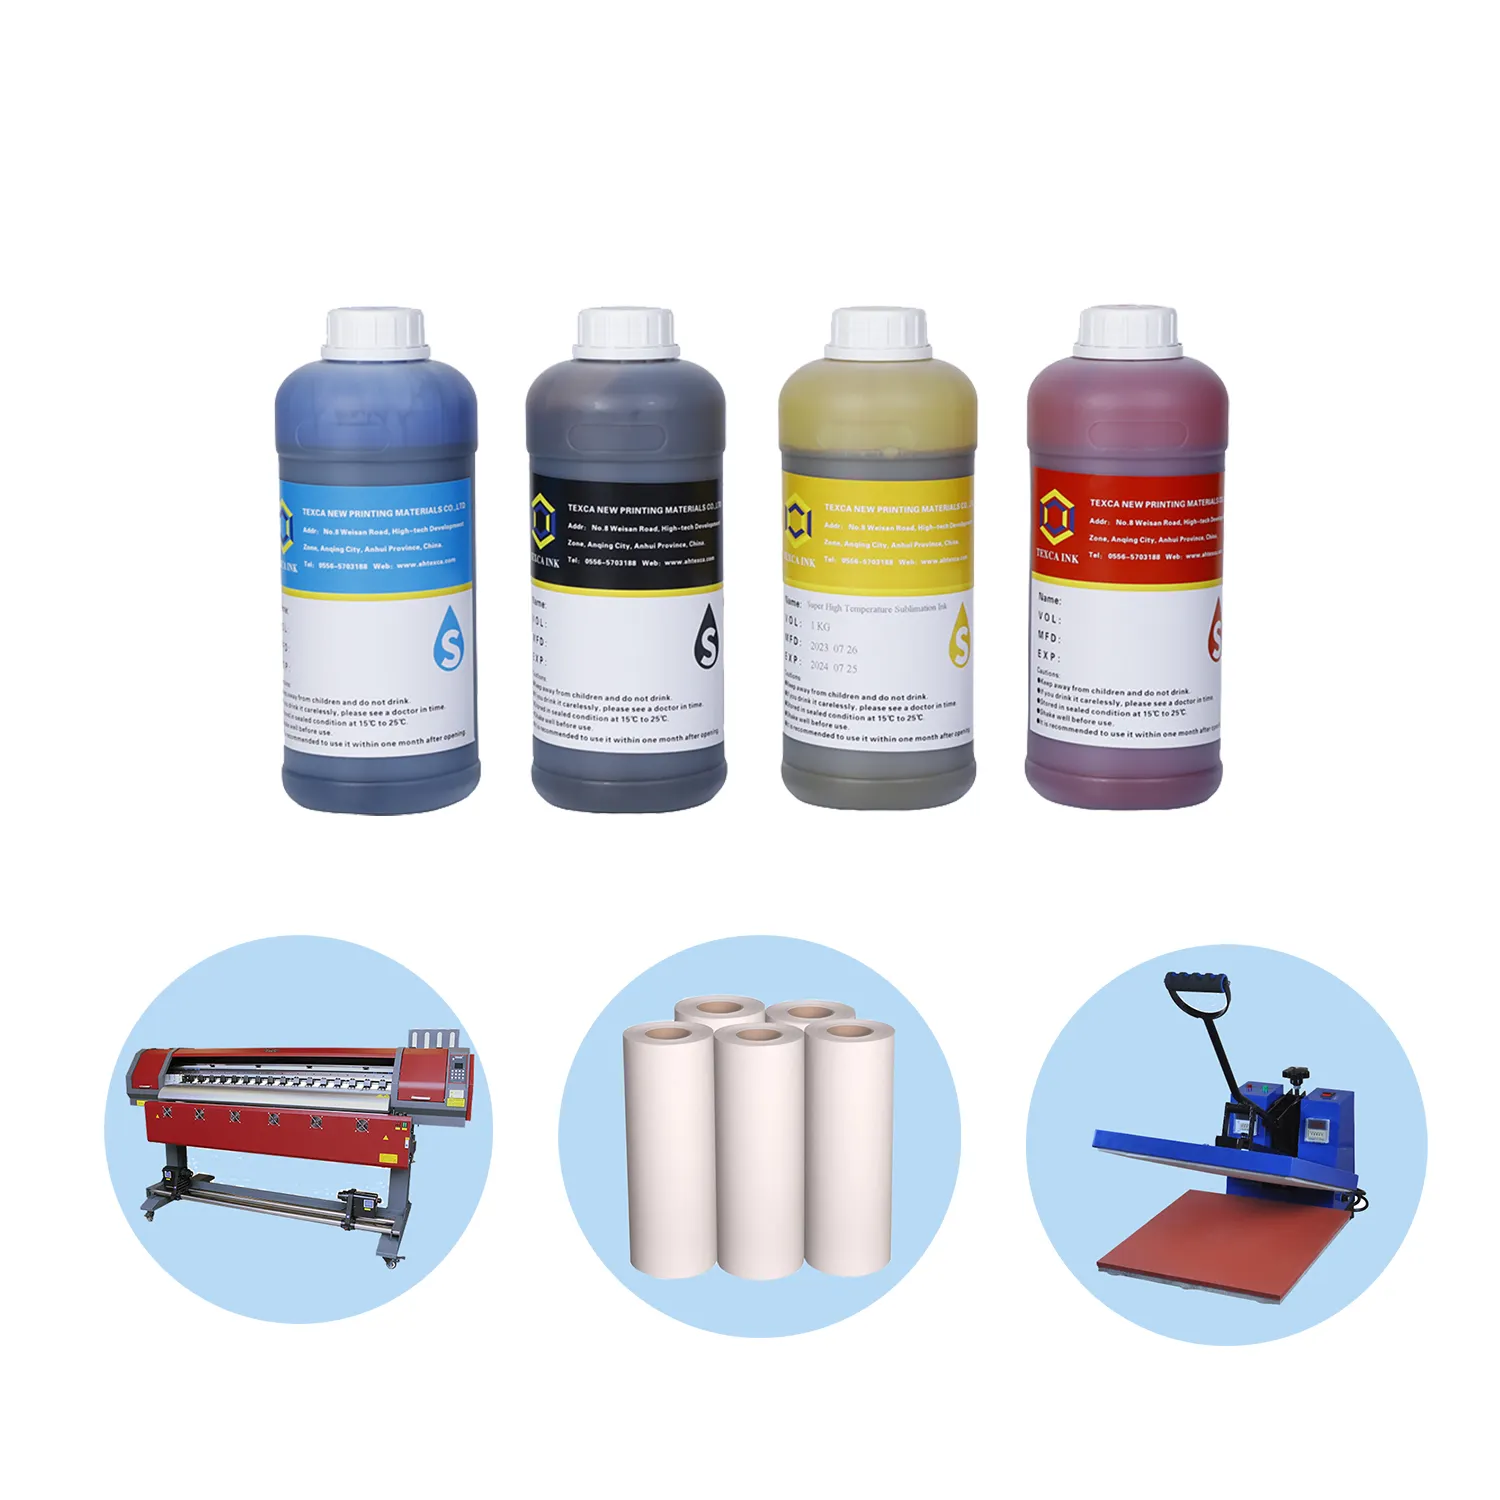 With Big Promotion Textile Printing Ink Textile Digital Printing Transfer Ink For Epson S3200 I3200 Polyester Printer